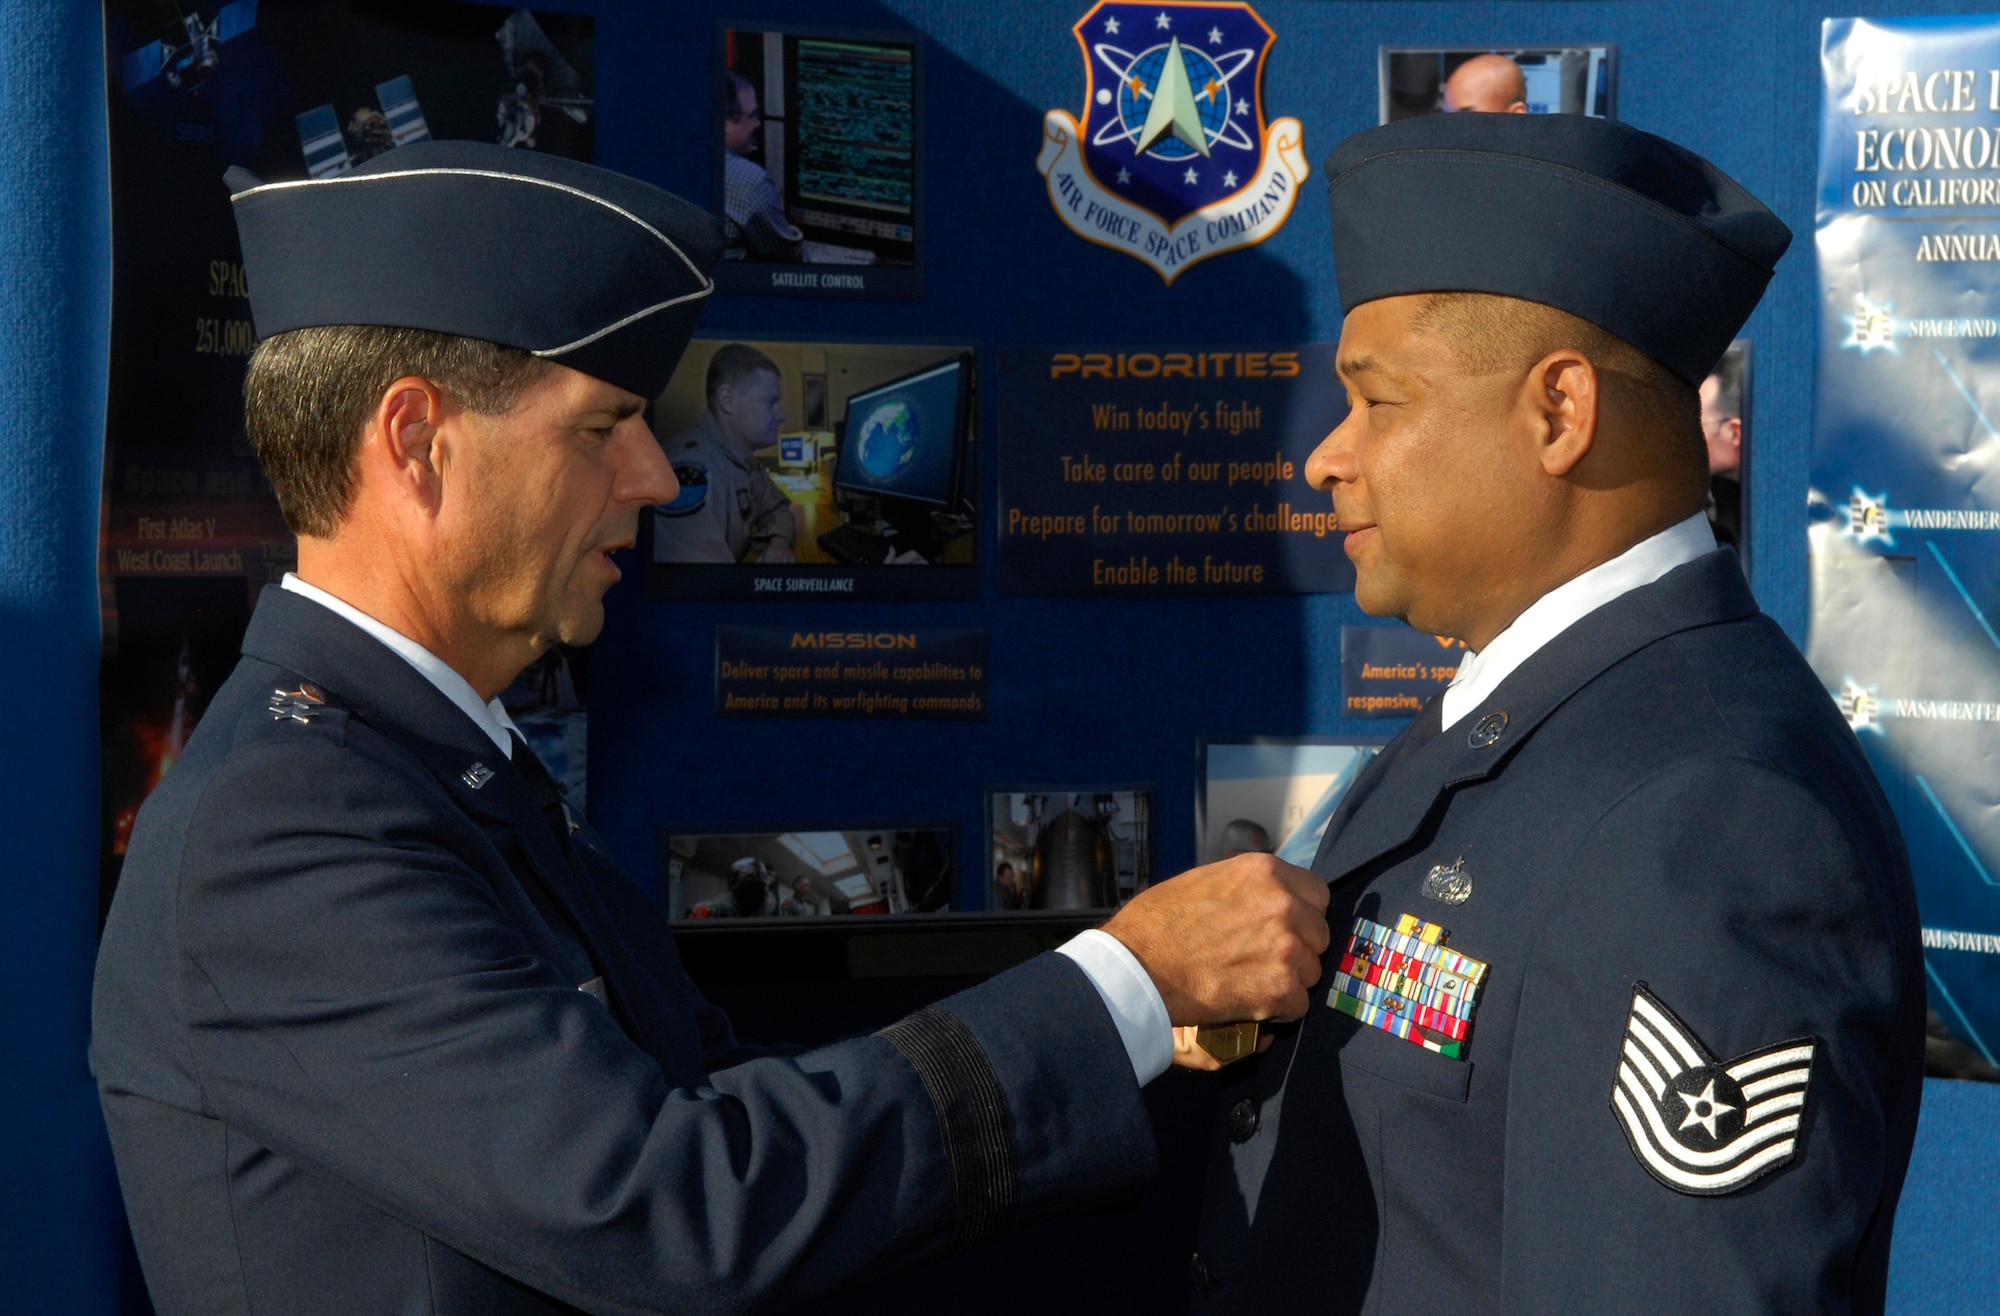 Lt. Gen. John T. Sheridan, SMC commander, presents Tech. Sgt Phillip Barton with the Air Force Commendation Medal at the Air Force Space Command display outside of the Los Angeles Coliseum before the start of the USC football game, Nov. 8. The ceremony was part of the events leading up to Air Force Week in Southern California. Air Force Week serves as the premier platform to share the Air Force story with our fellow citizens. The 2008 Air Force Weeks will include community visits and talks by Air Force officials, flight demonstrations and displays providing an up close and personal look at the men and women of the Air Force serving worldwide in defense of freedom. (Photo by Stephen Schester)